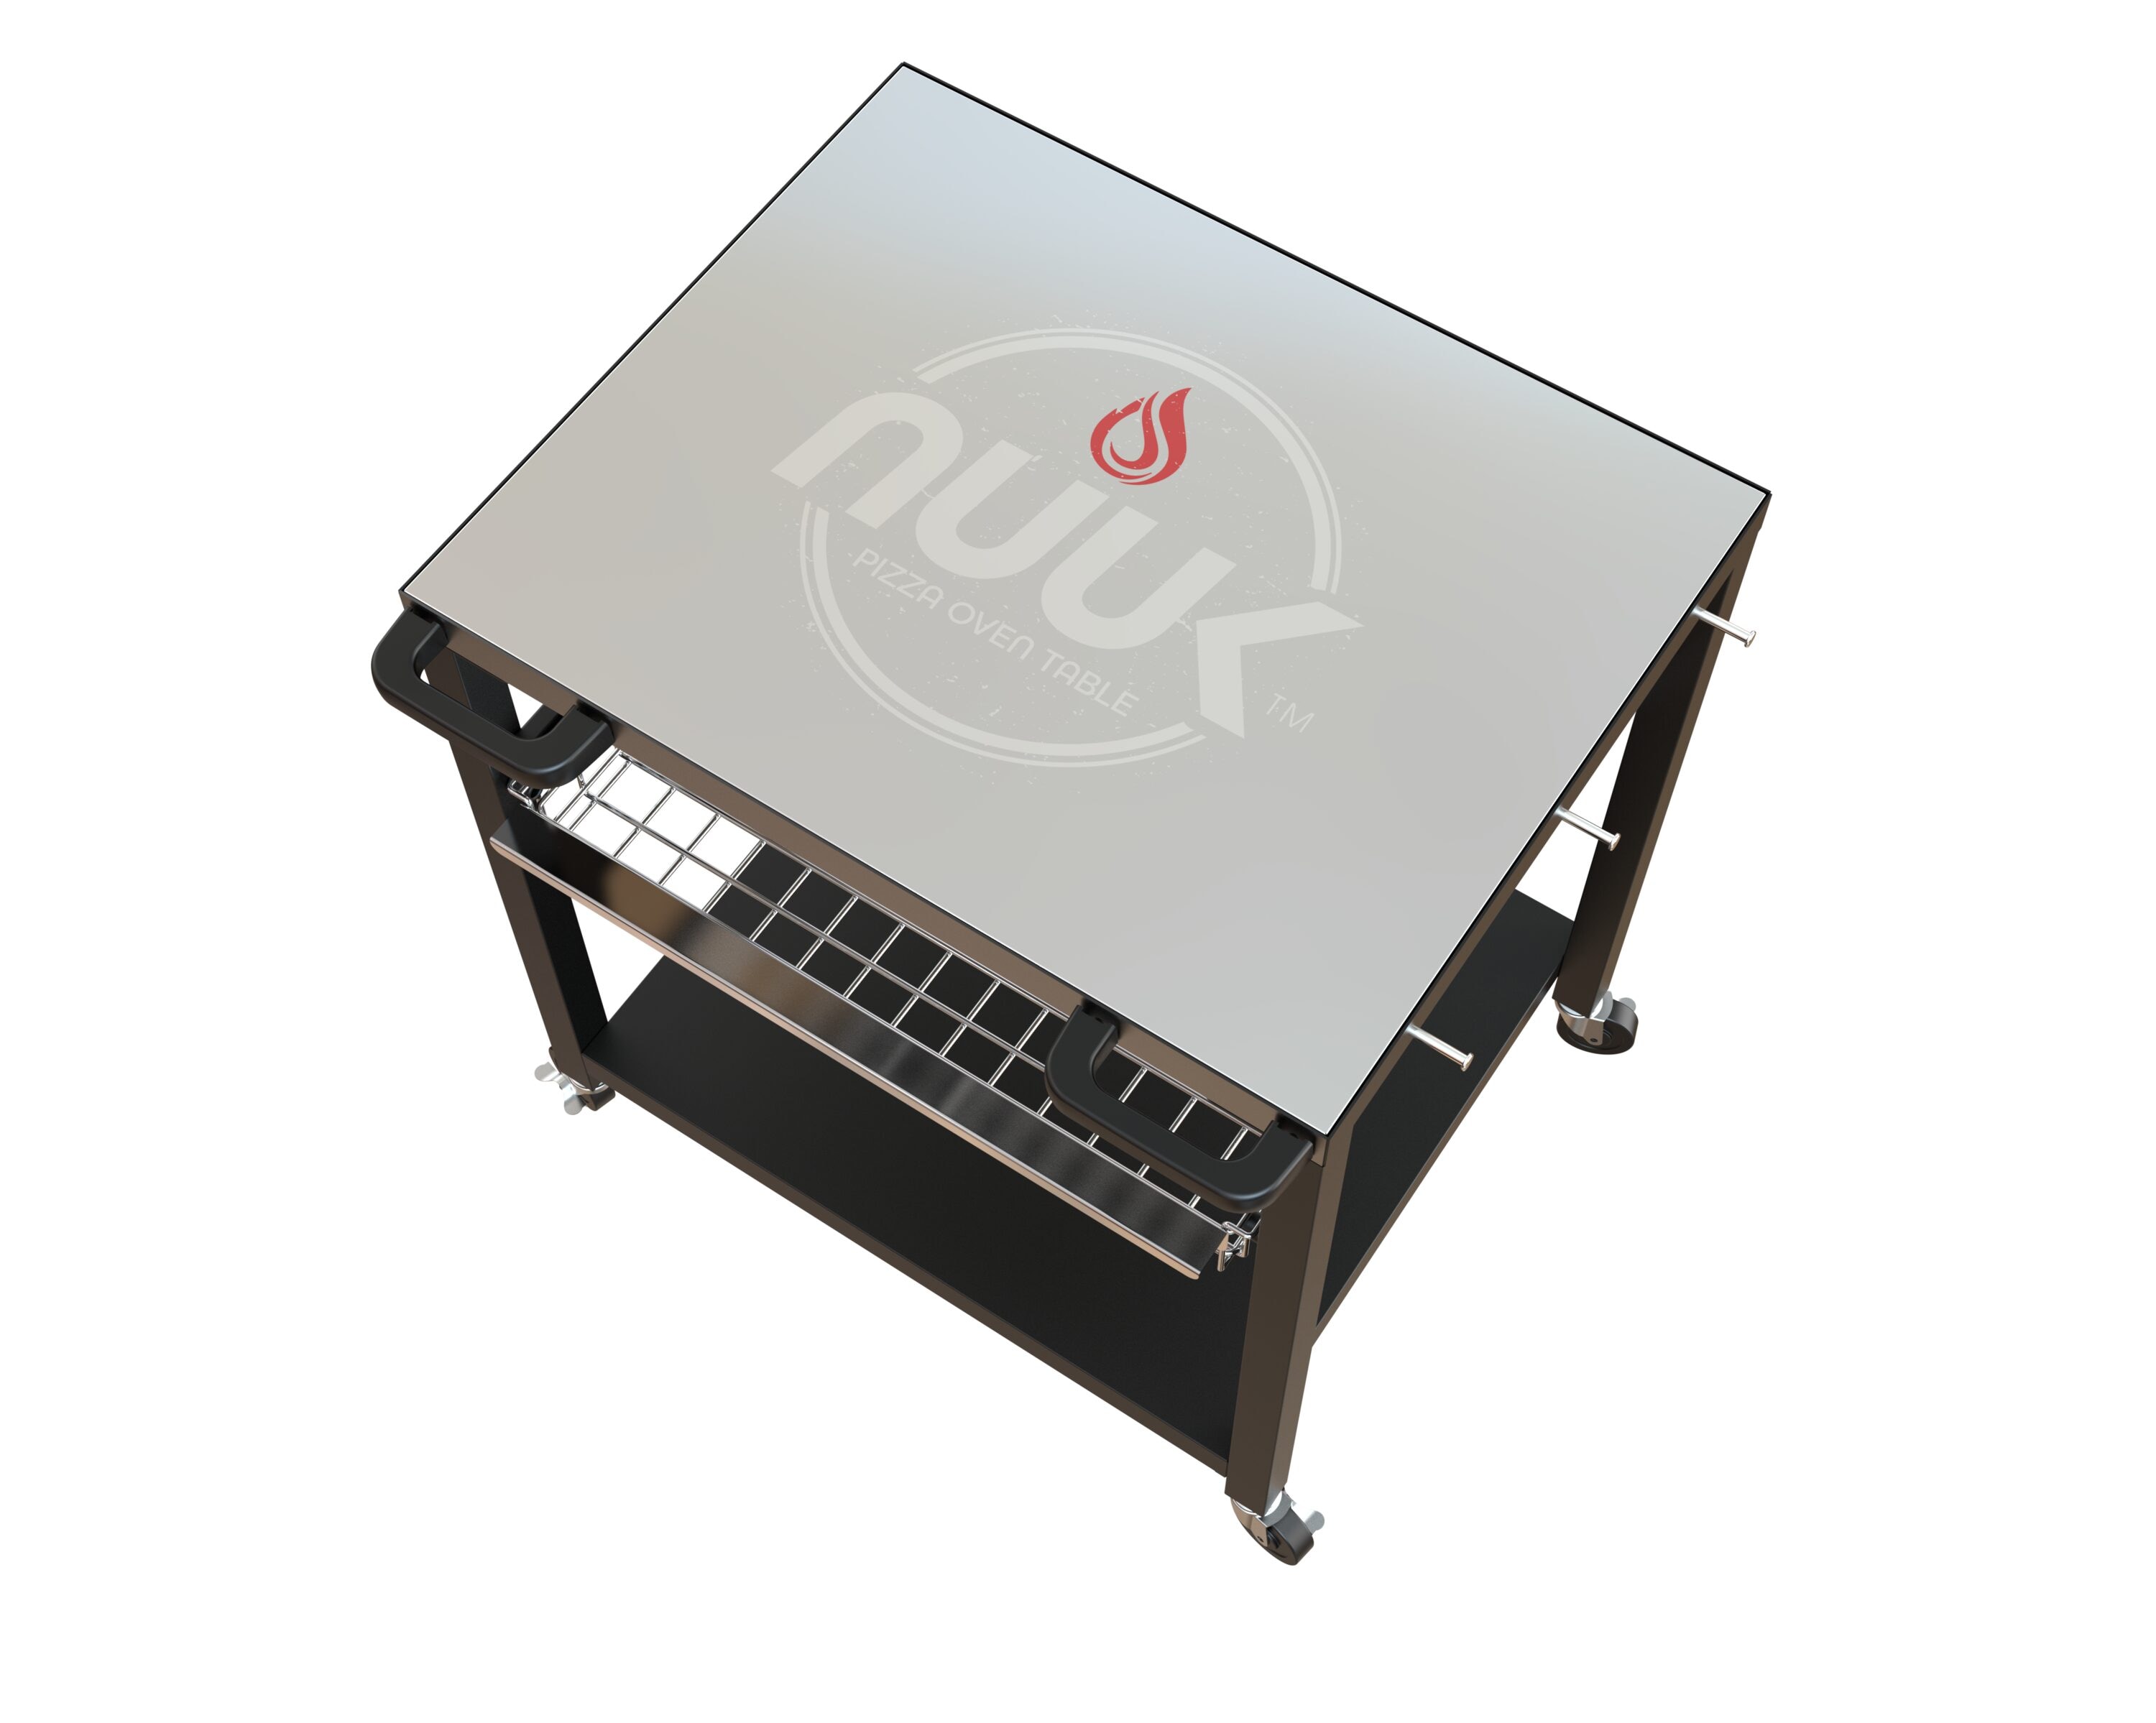 New Pizza Oven Table Grill Cart, Large Grill Table for Ninja Grill